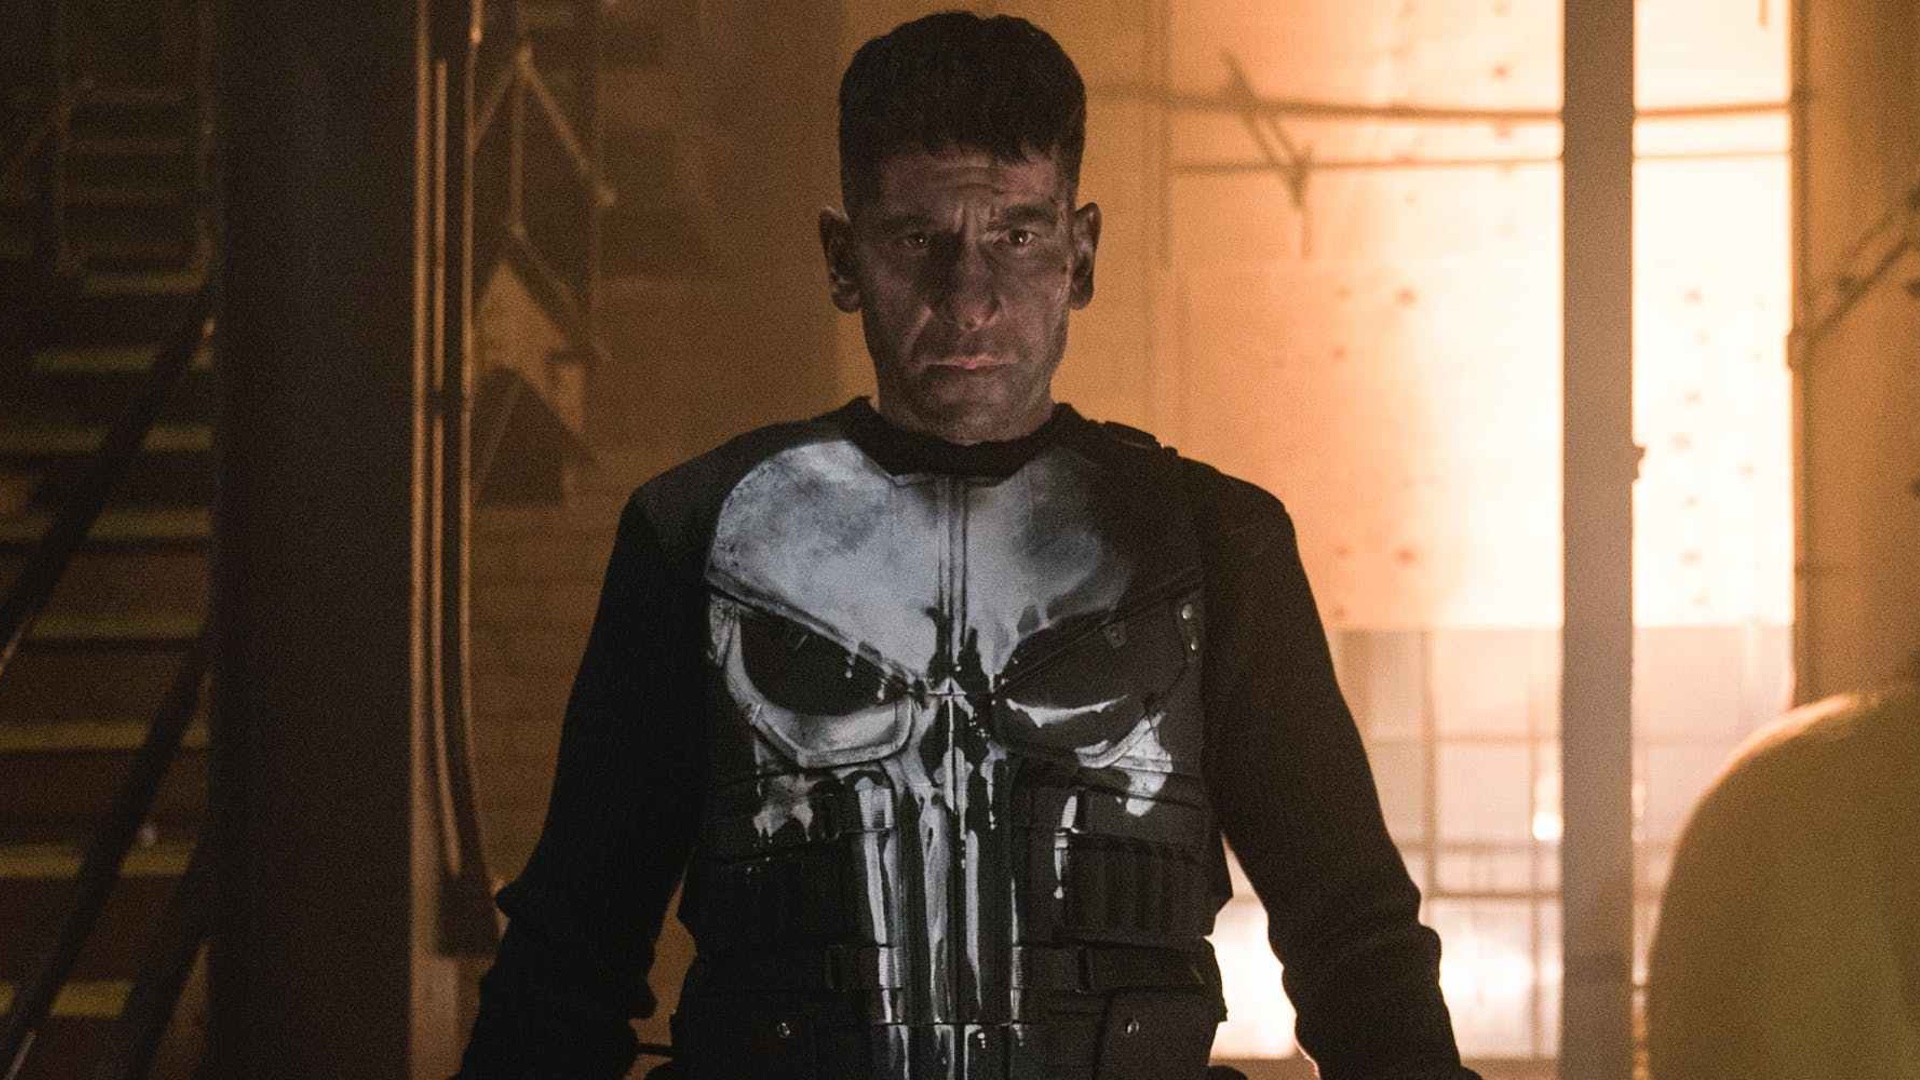 Jon Bernthal back as Punisher in Daredevil: Born Again. However, monkey's paw time, it seems Foggy and Karen are out.